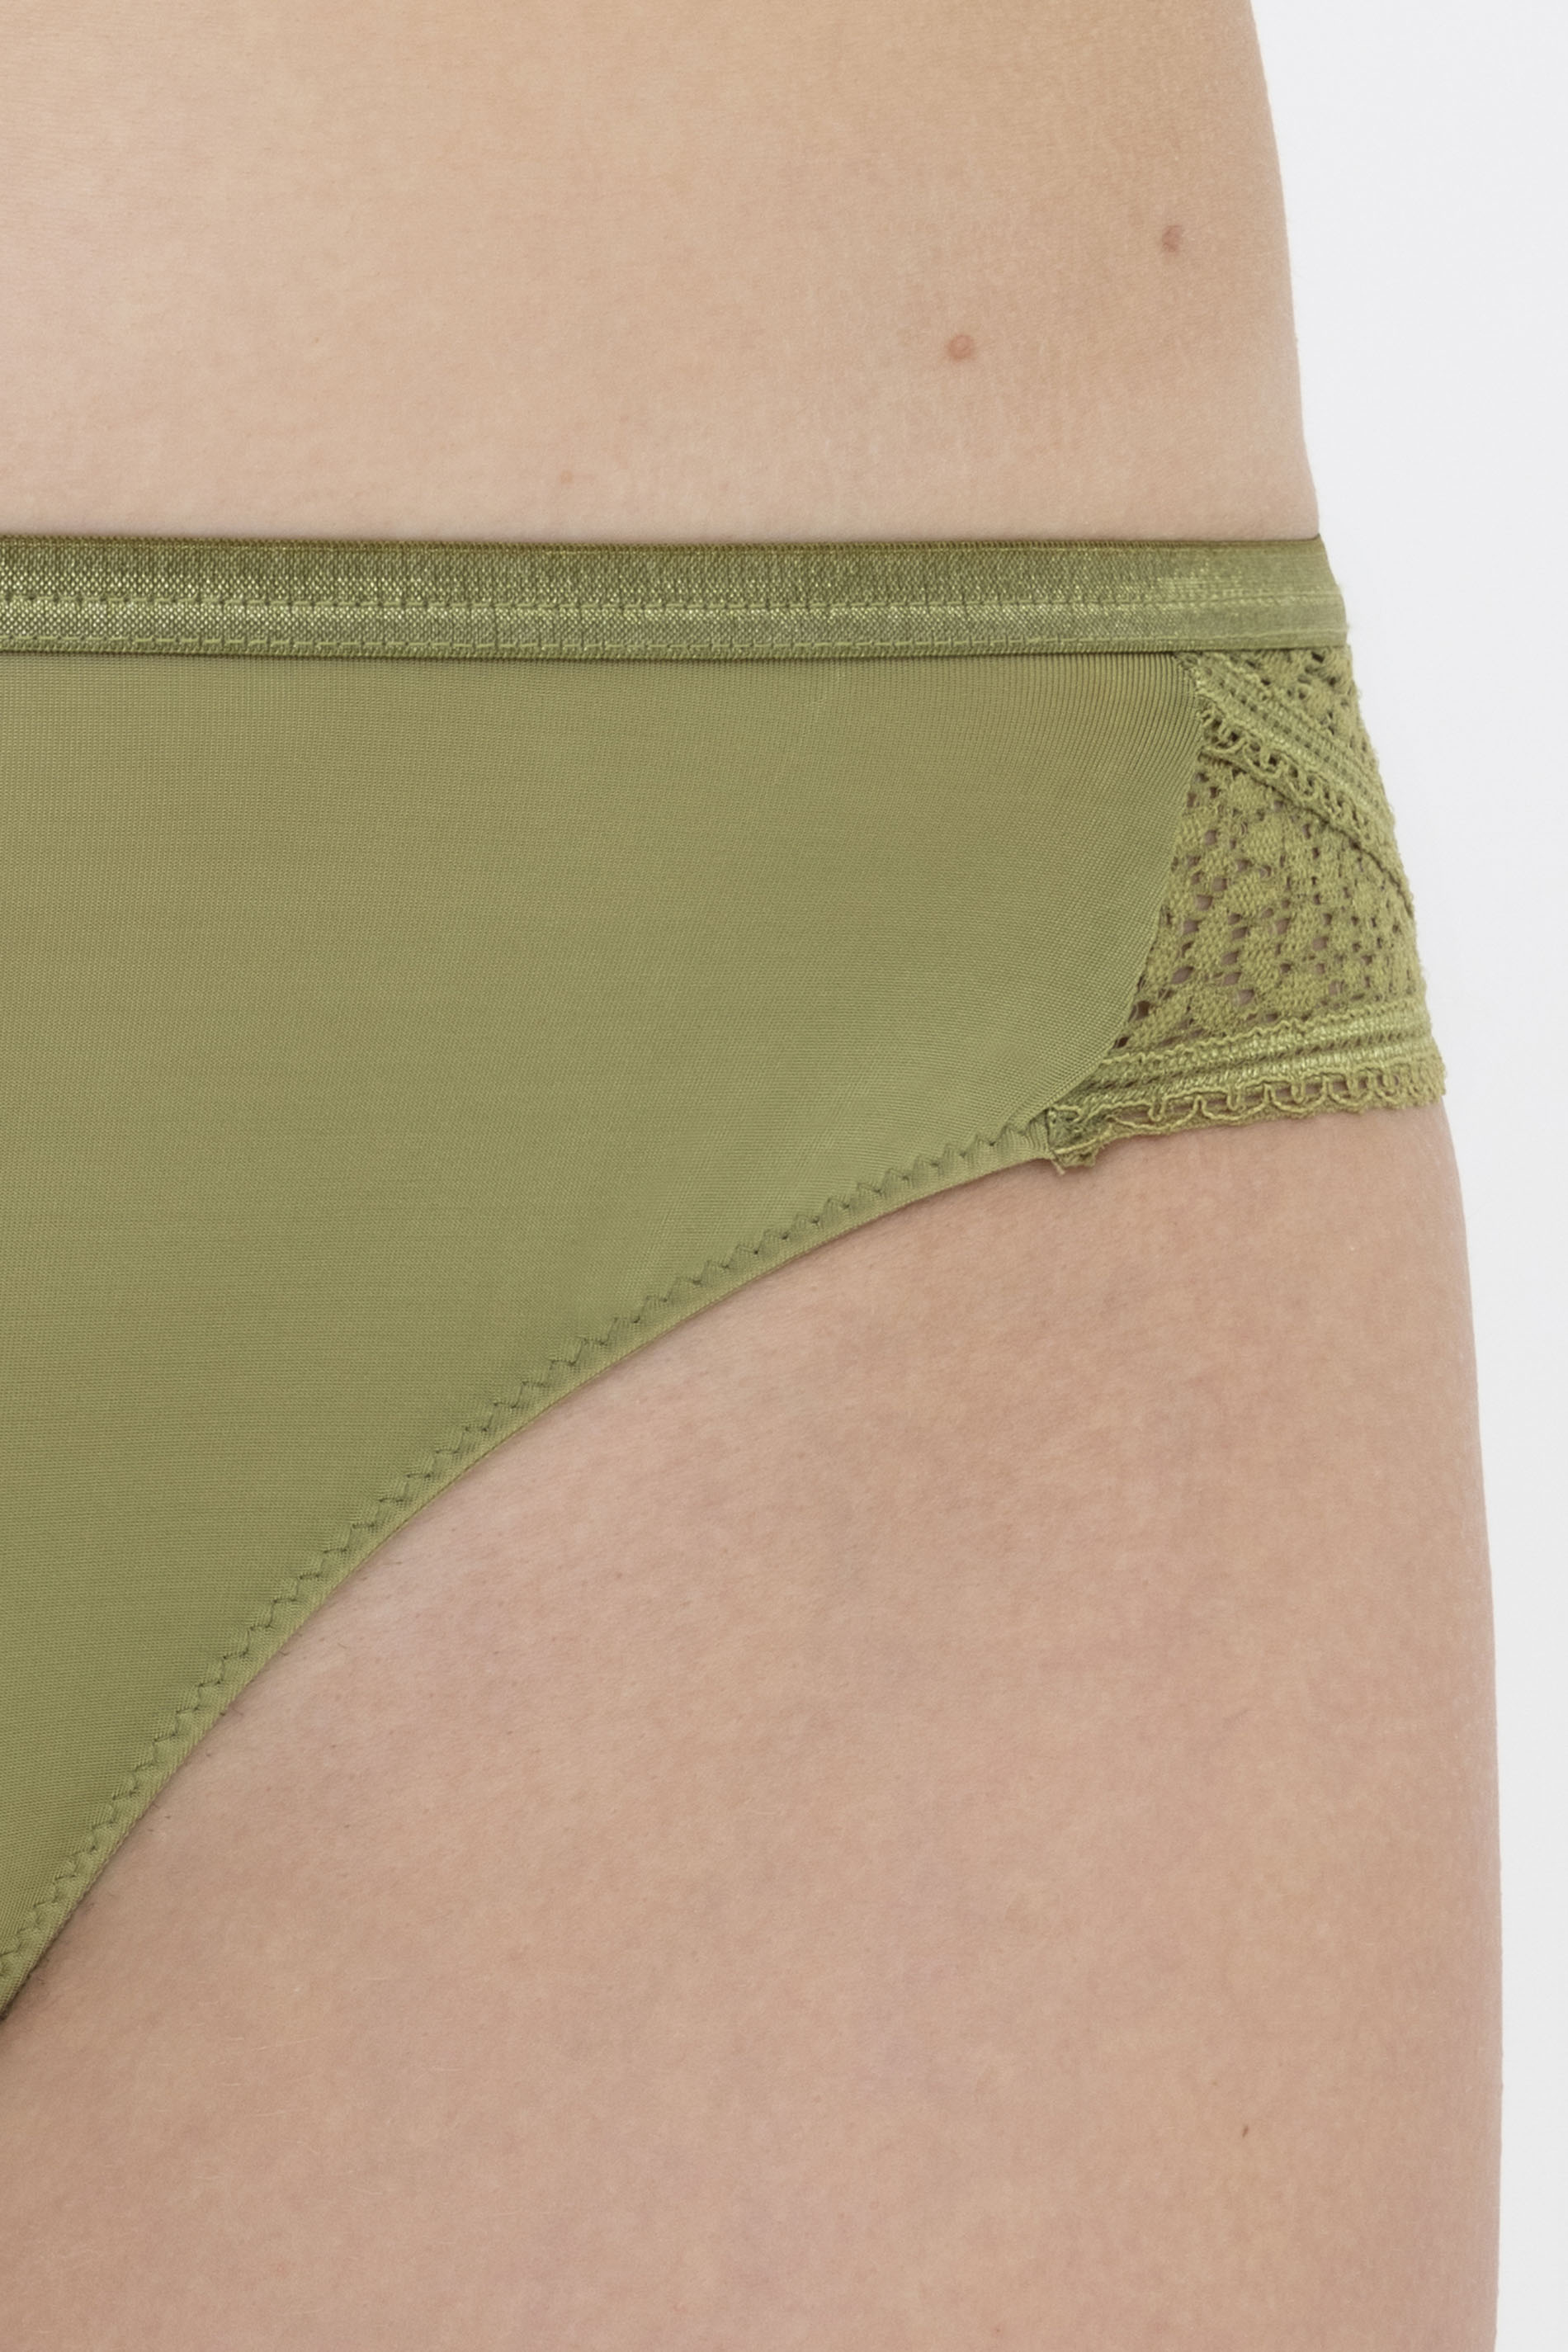 Mini-Slip Tuscan Green Serie Poetry Iconic Detailansicht 01 | mey®